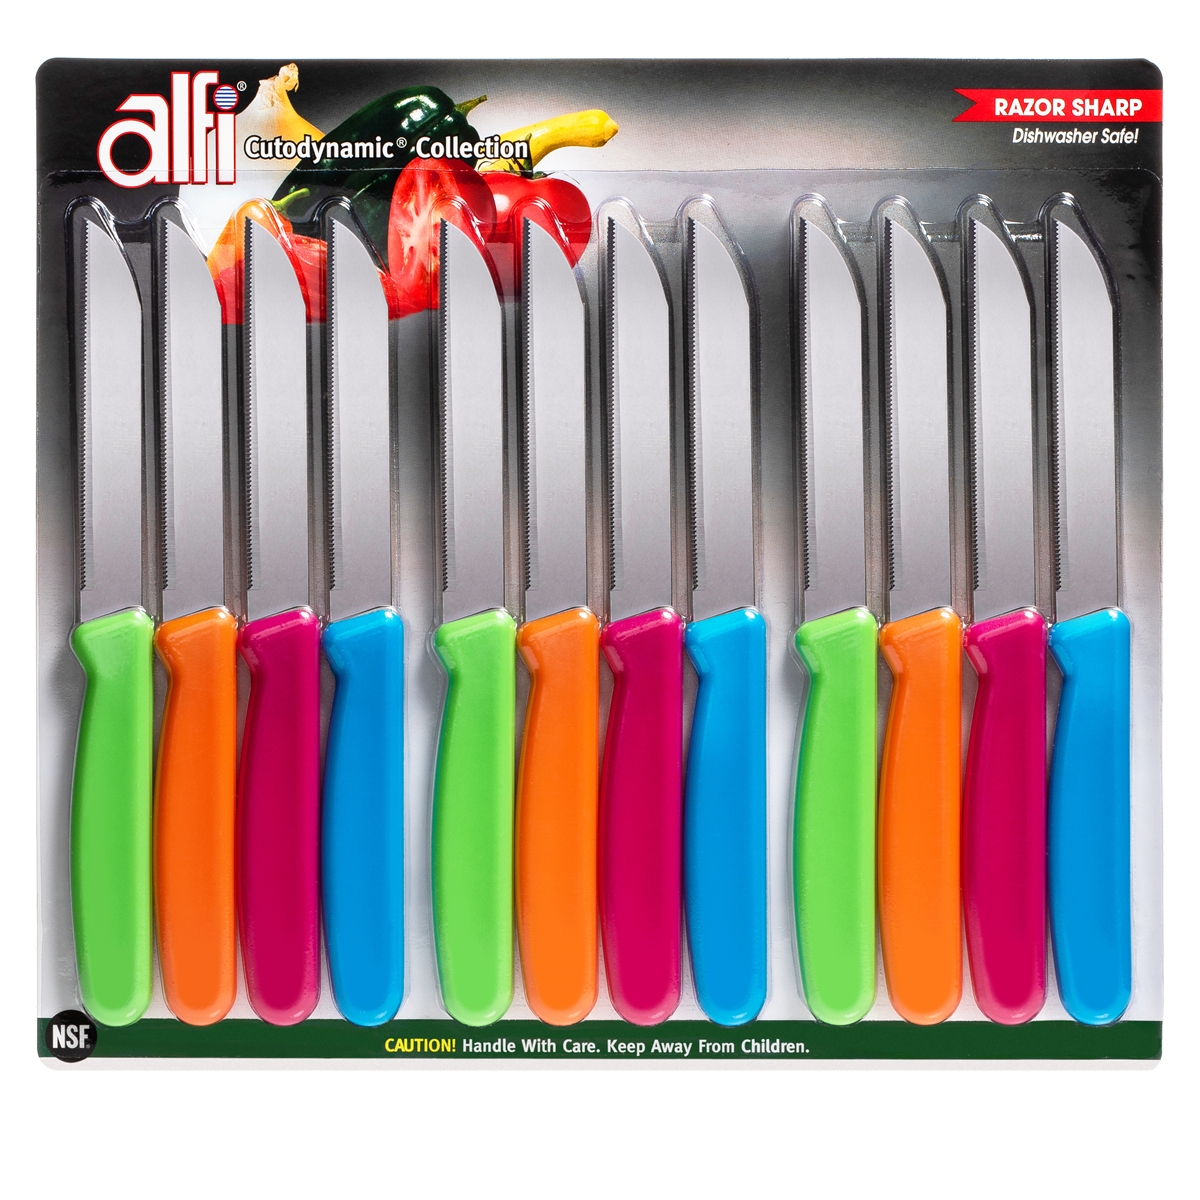 Fixwell Stainless Steel Knife, Assorted Colors